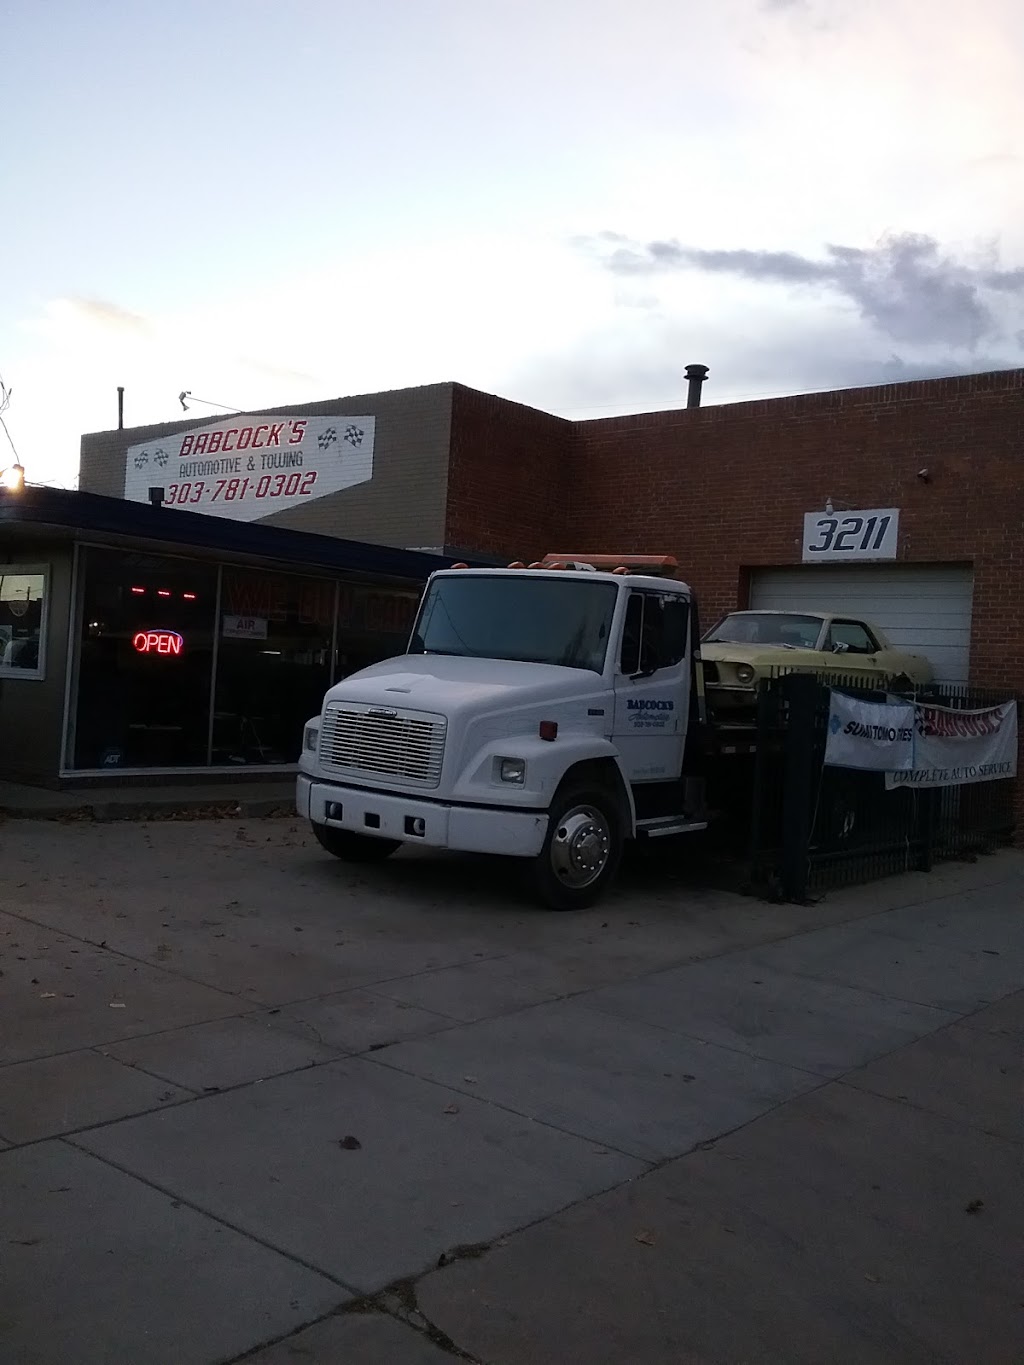 Babcocks Automotive & Towing | 3211 S Broadway, Englewood, CO 80113 | Phone: (303) 781-0302